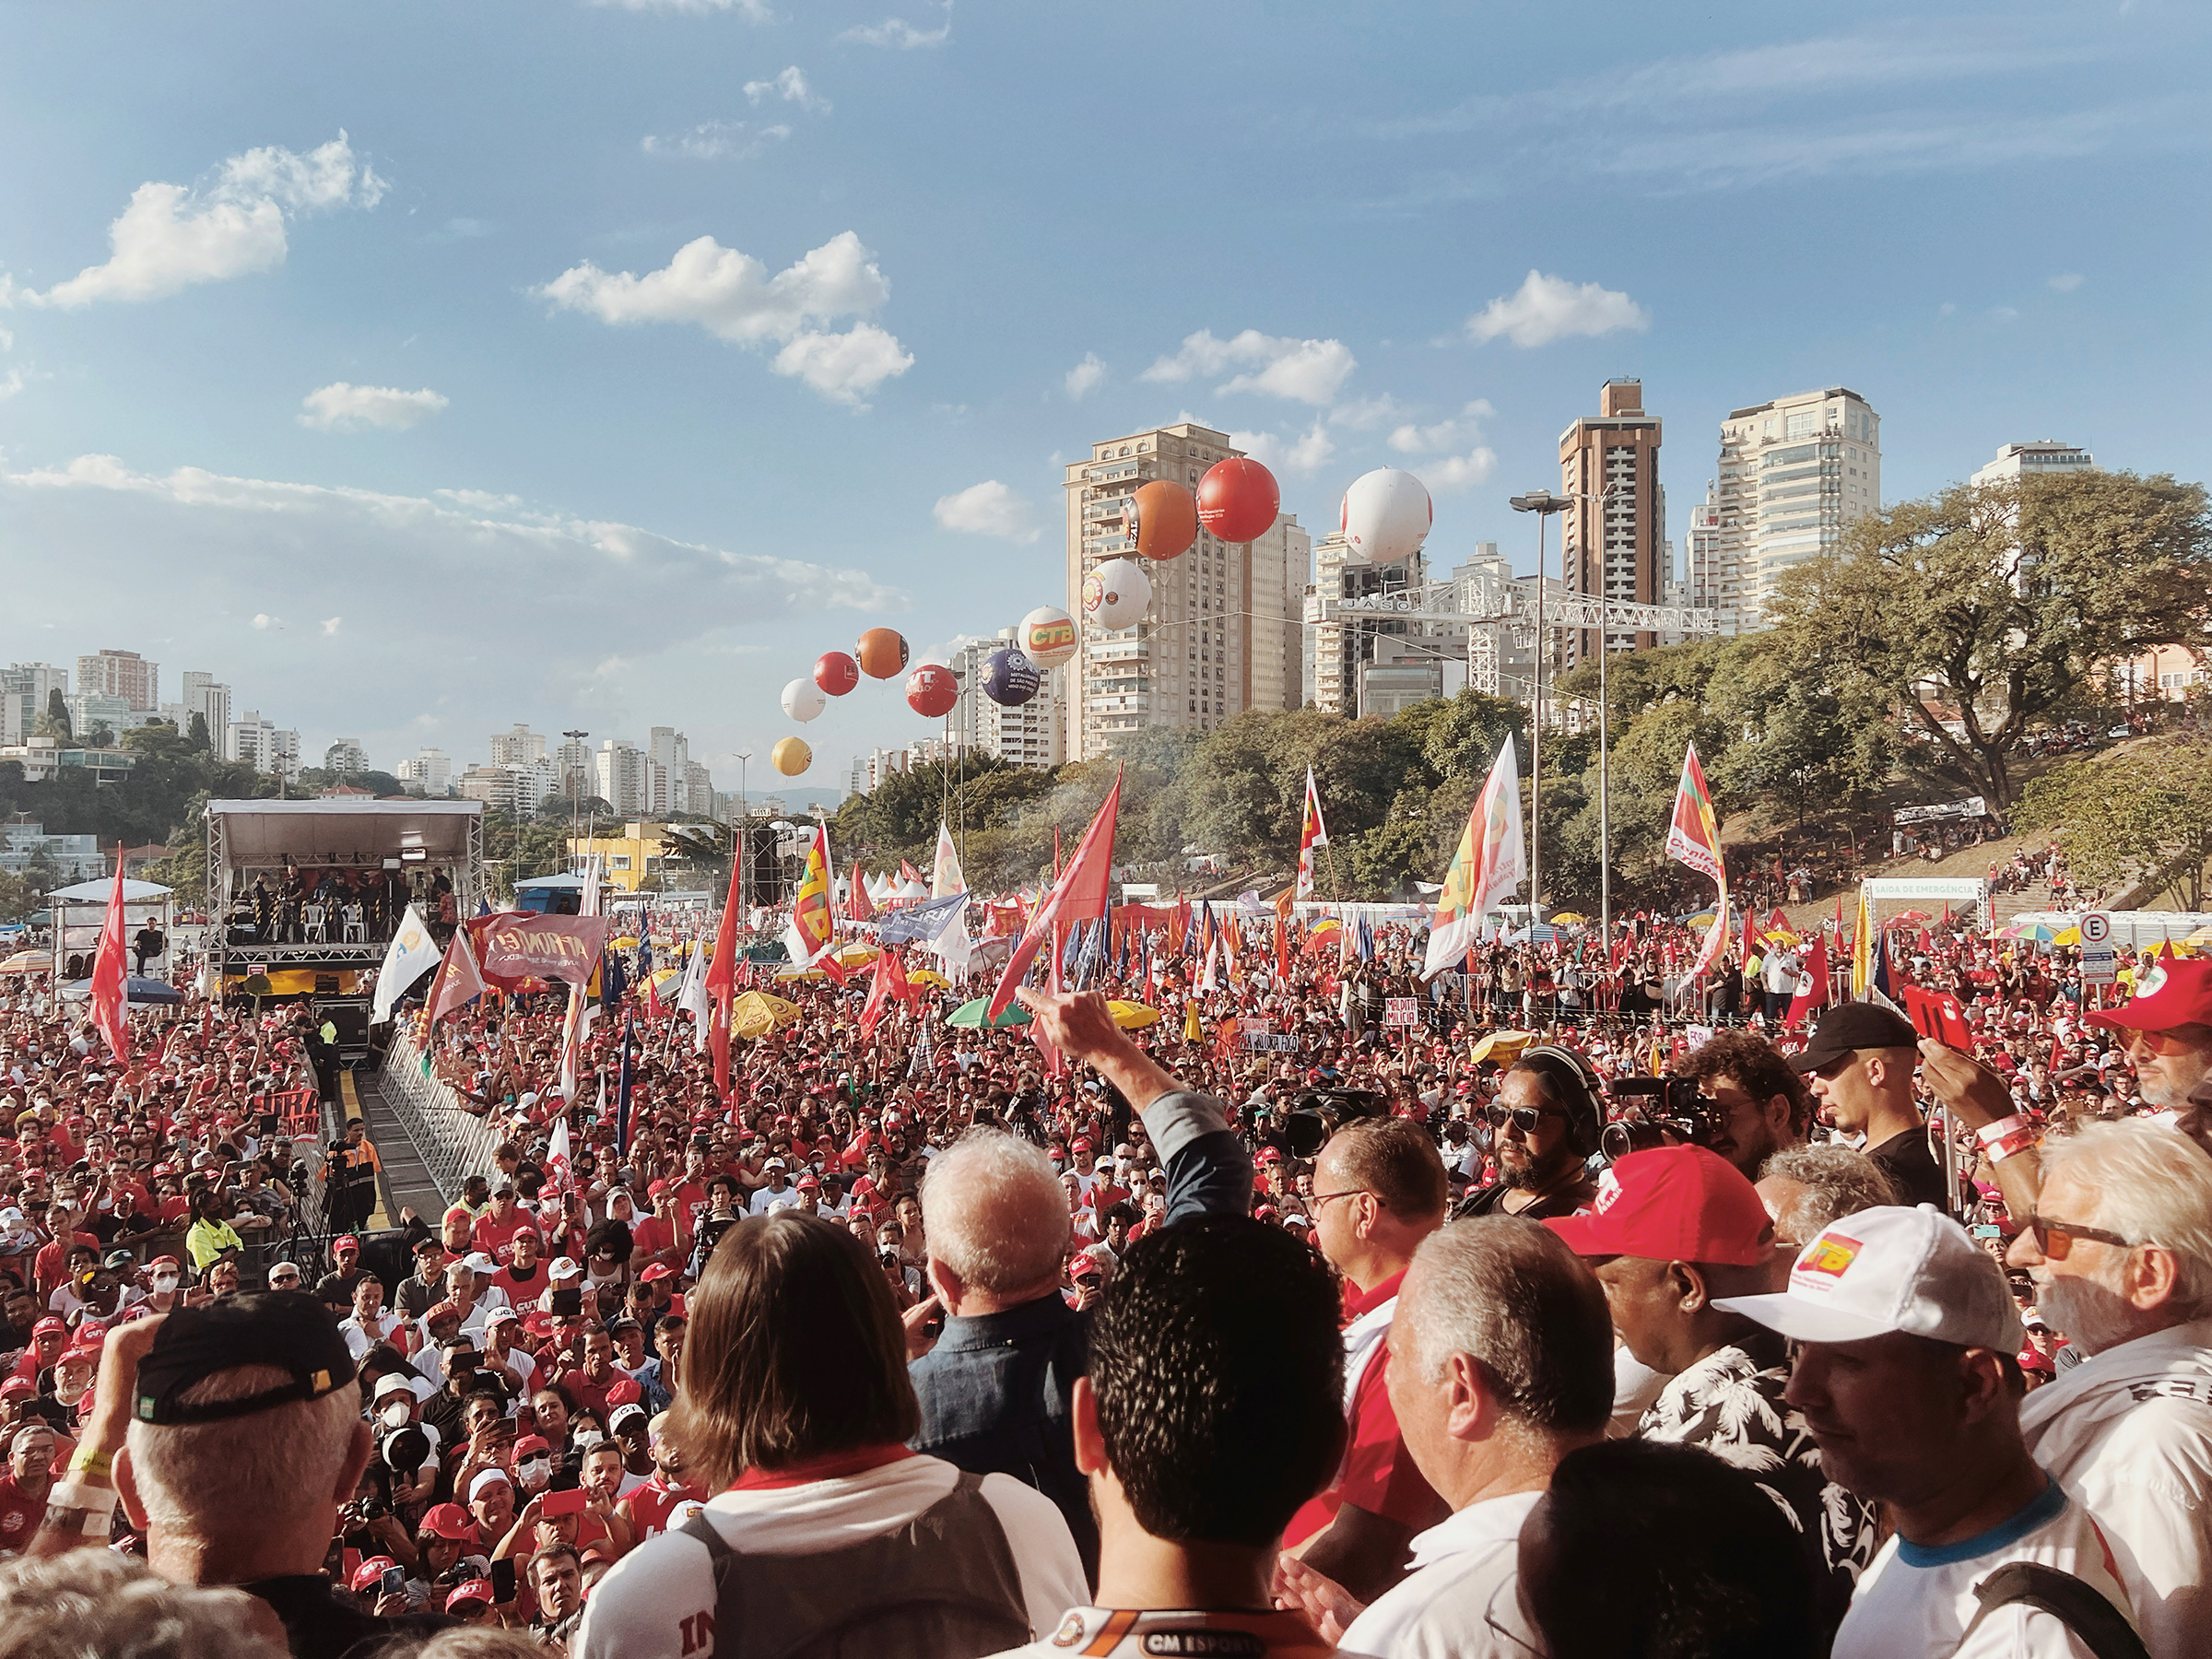 Luiz Inácio Lula da Silva gives a speech to union workers at Praça Charles Muller, São Paulo, on International Workers' day, May 1, 2022. (Luisa Dörr for TIME)